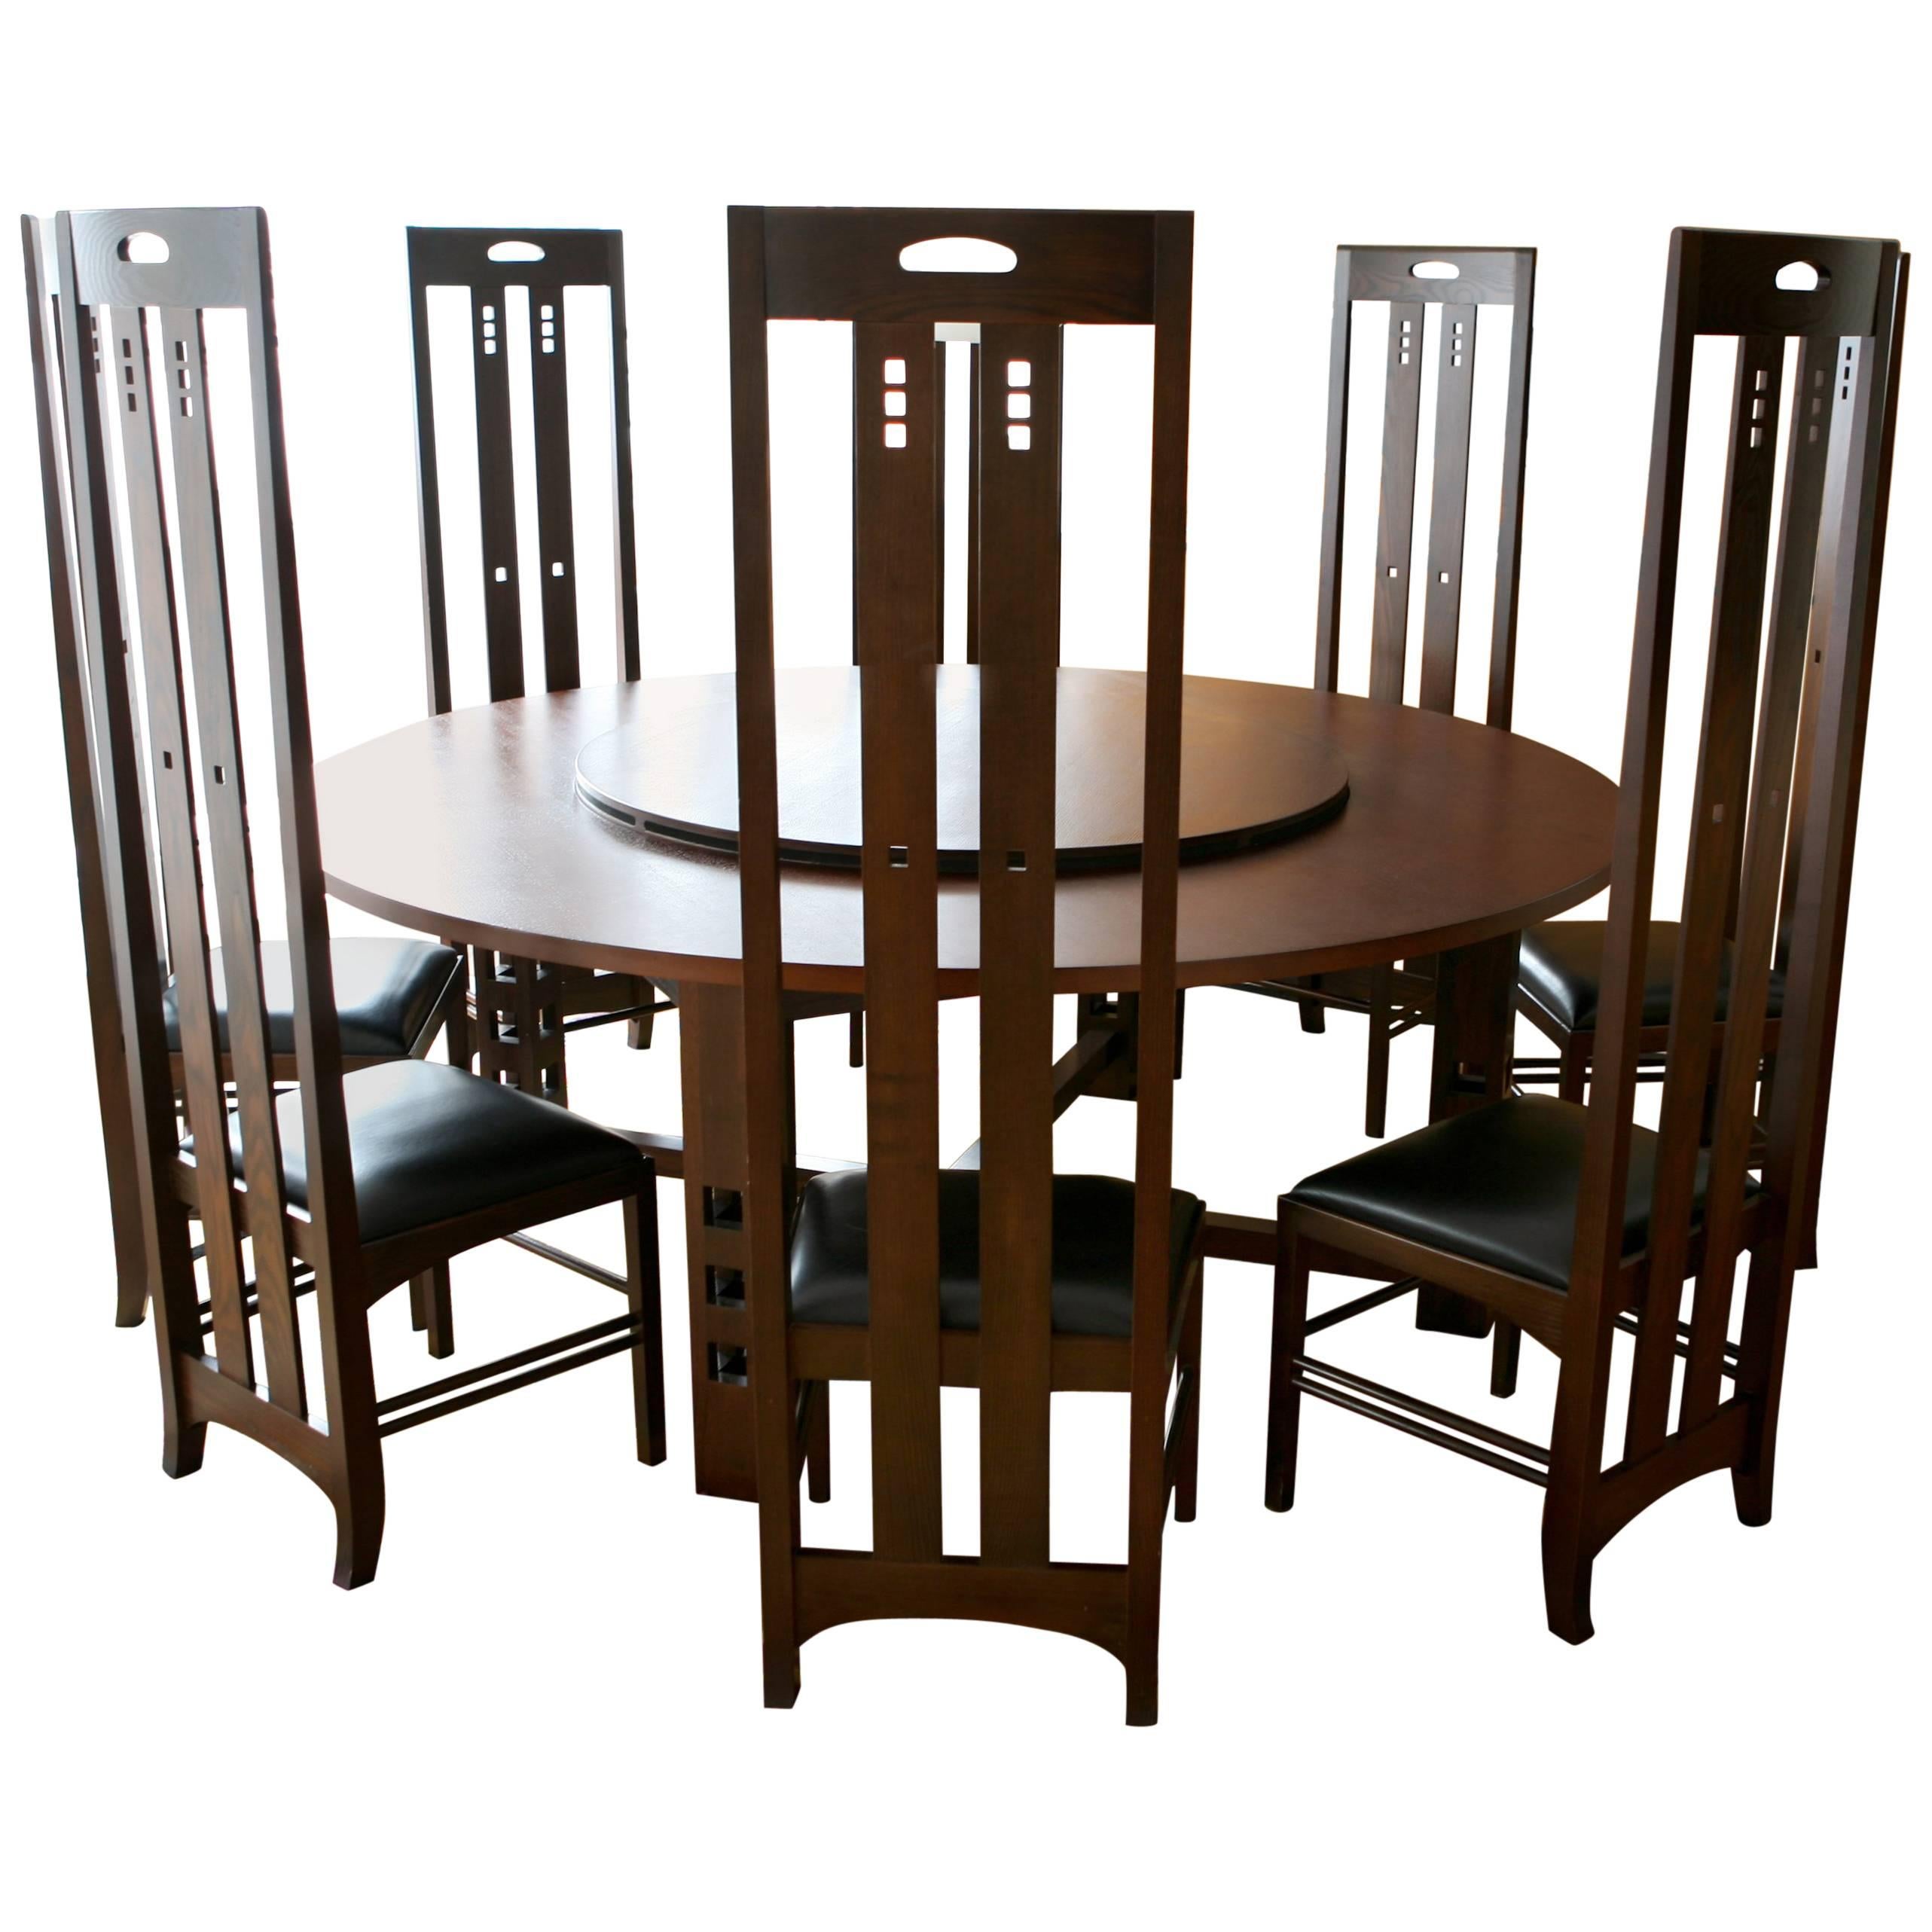 Art Nouveau Style Set of Dining Table and High Back Chairs by Macintosh